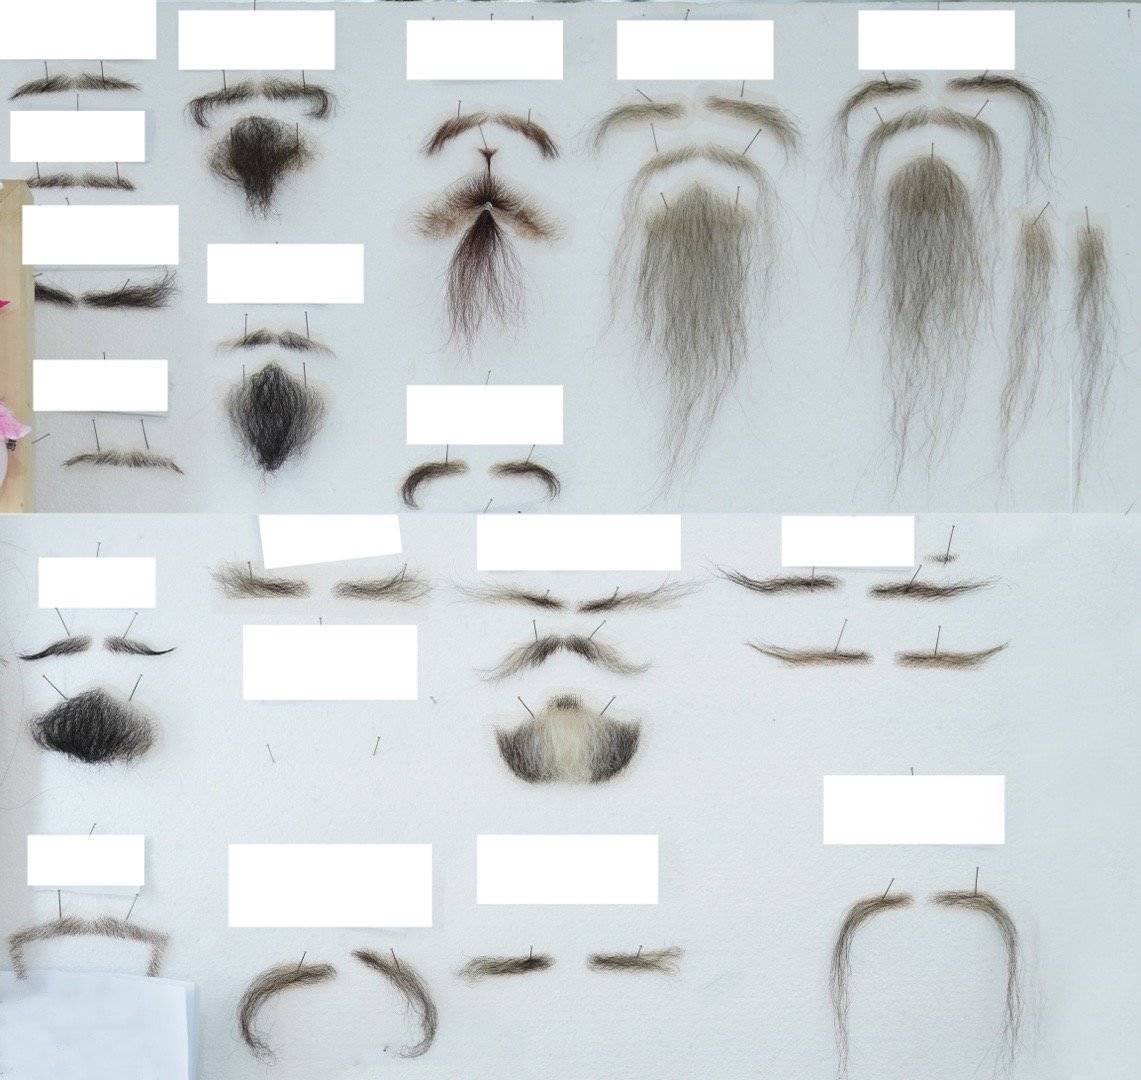 Ahahahahahahahaha  Thousand worries is the cutest thing!! And look at all the moustaches! Guess which is whose? #lof  #yibo